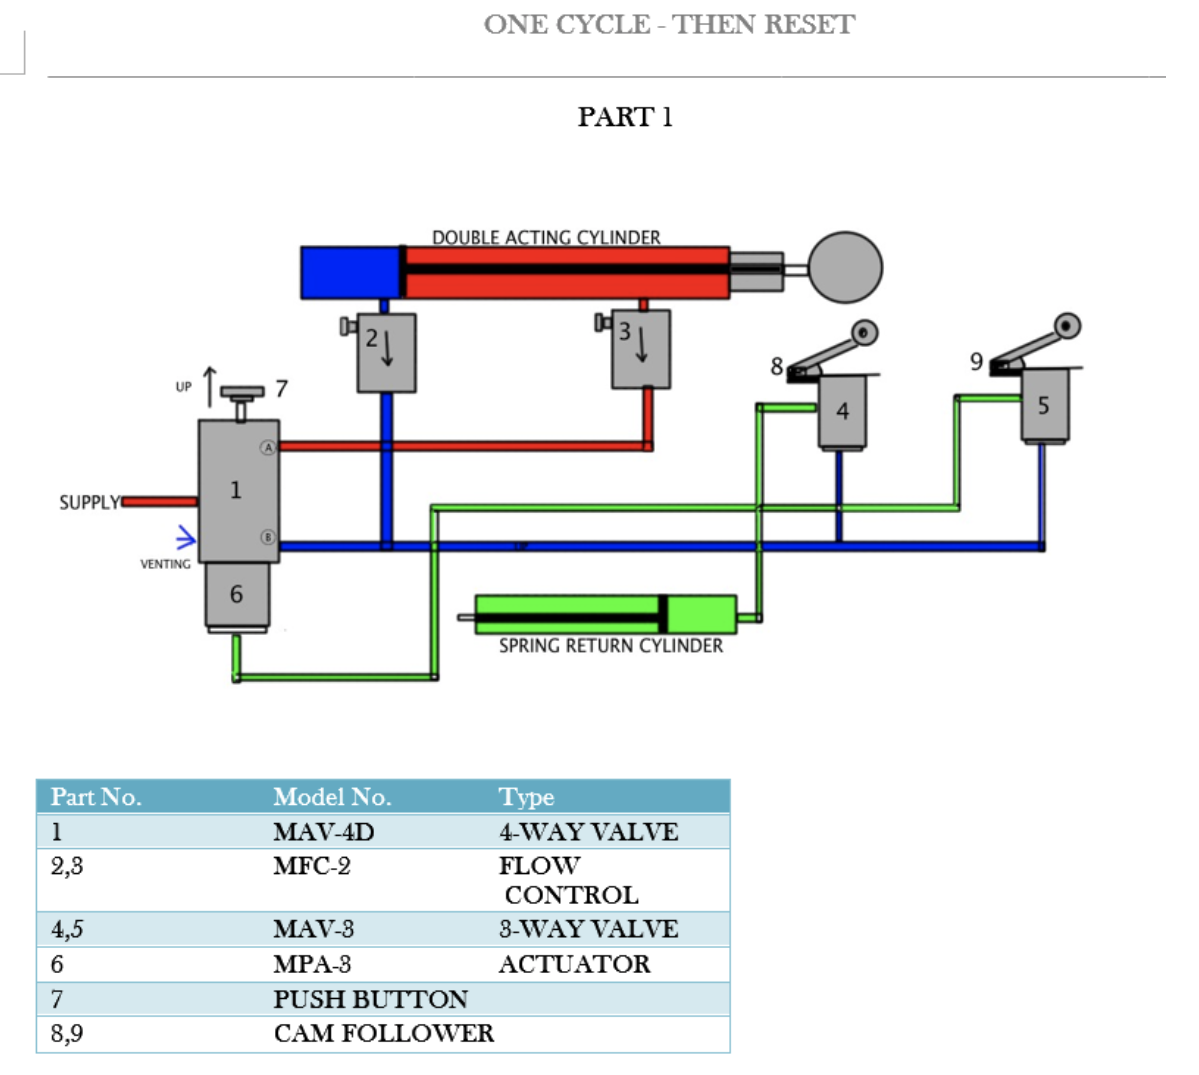 ONE CYCLE - THEN RESET
PART 1
DOUBLE ACTING CYLINDER
UP
7
SUPPLY
VENTING
6.
SPRING RETURN CYLINDER
Part No.
Model No.
Туре
1
MAV-4D
4-WAY VALVE
2,8
MFC-2
FLOW
CONTROL
4,5
MAV-8
3-WAY VALVE
6
МРА-3
ACTUATOR
7
PUSH BUTTON
8,9
CAM FOLLOWER
m
